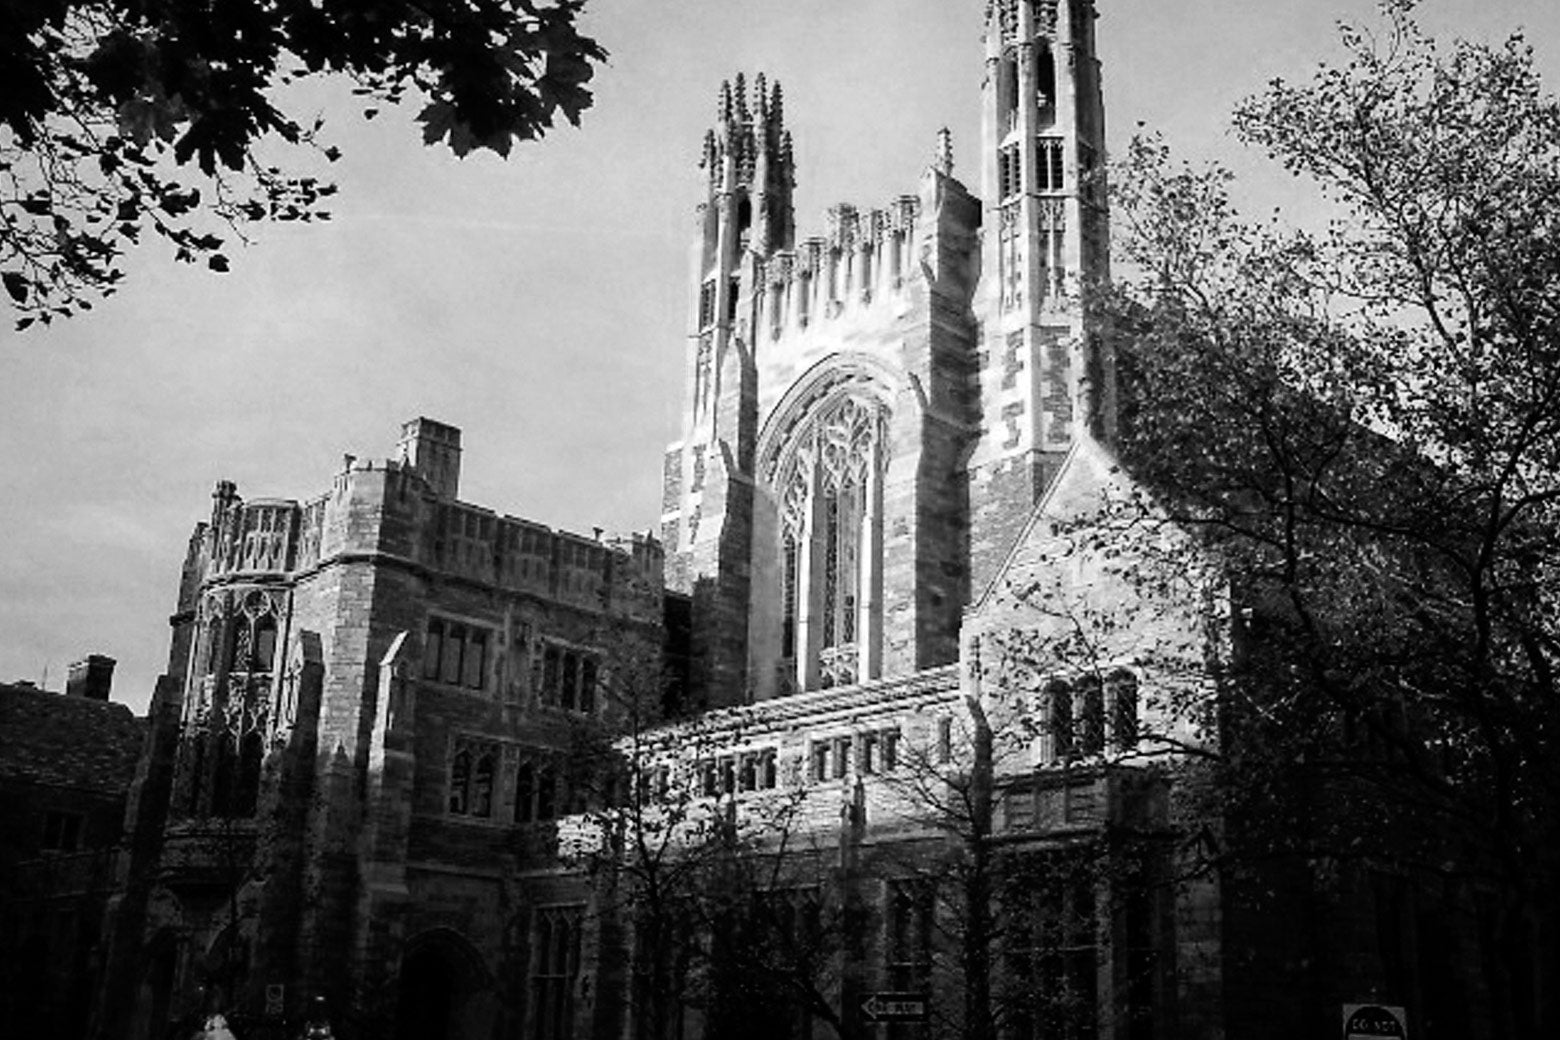 Jed Rubenfeld investigation at Yale Law School: misconduct allegations ...